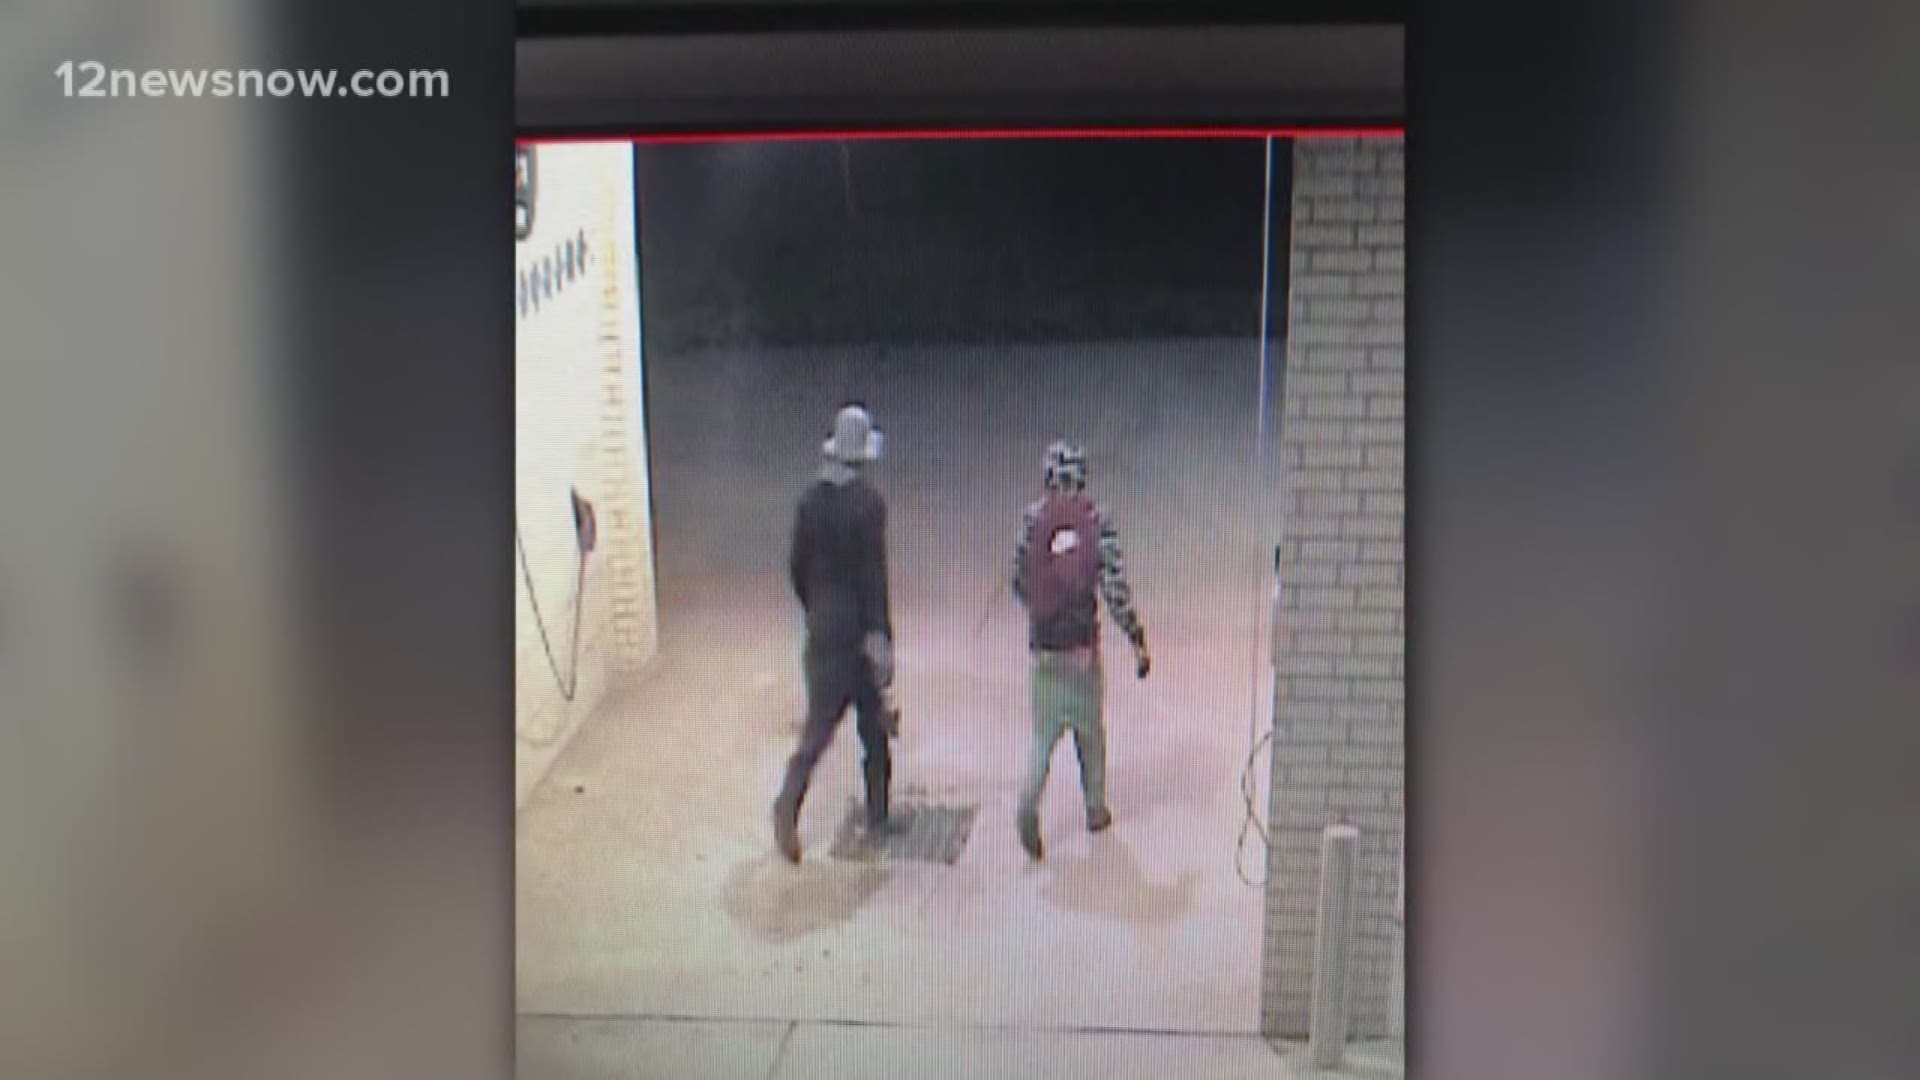 Port Neches Police got a call from Slick's Car Wash on Magnolia Avenue after an alarm went off. Security footage showed two suspects trying to pry open the coin slot